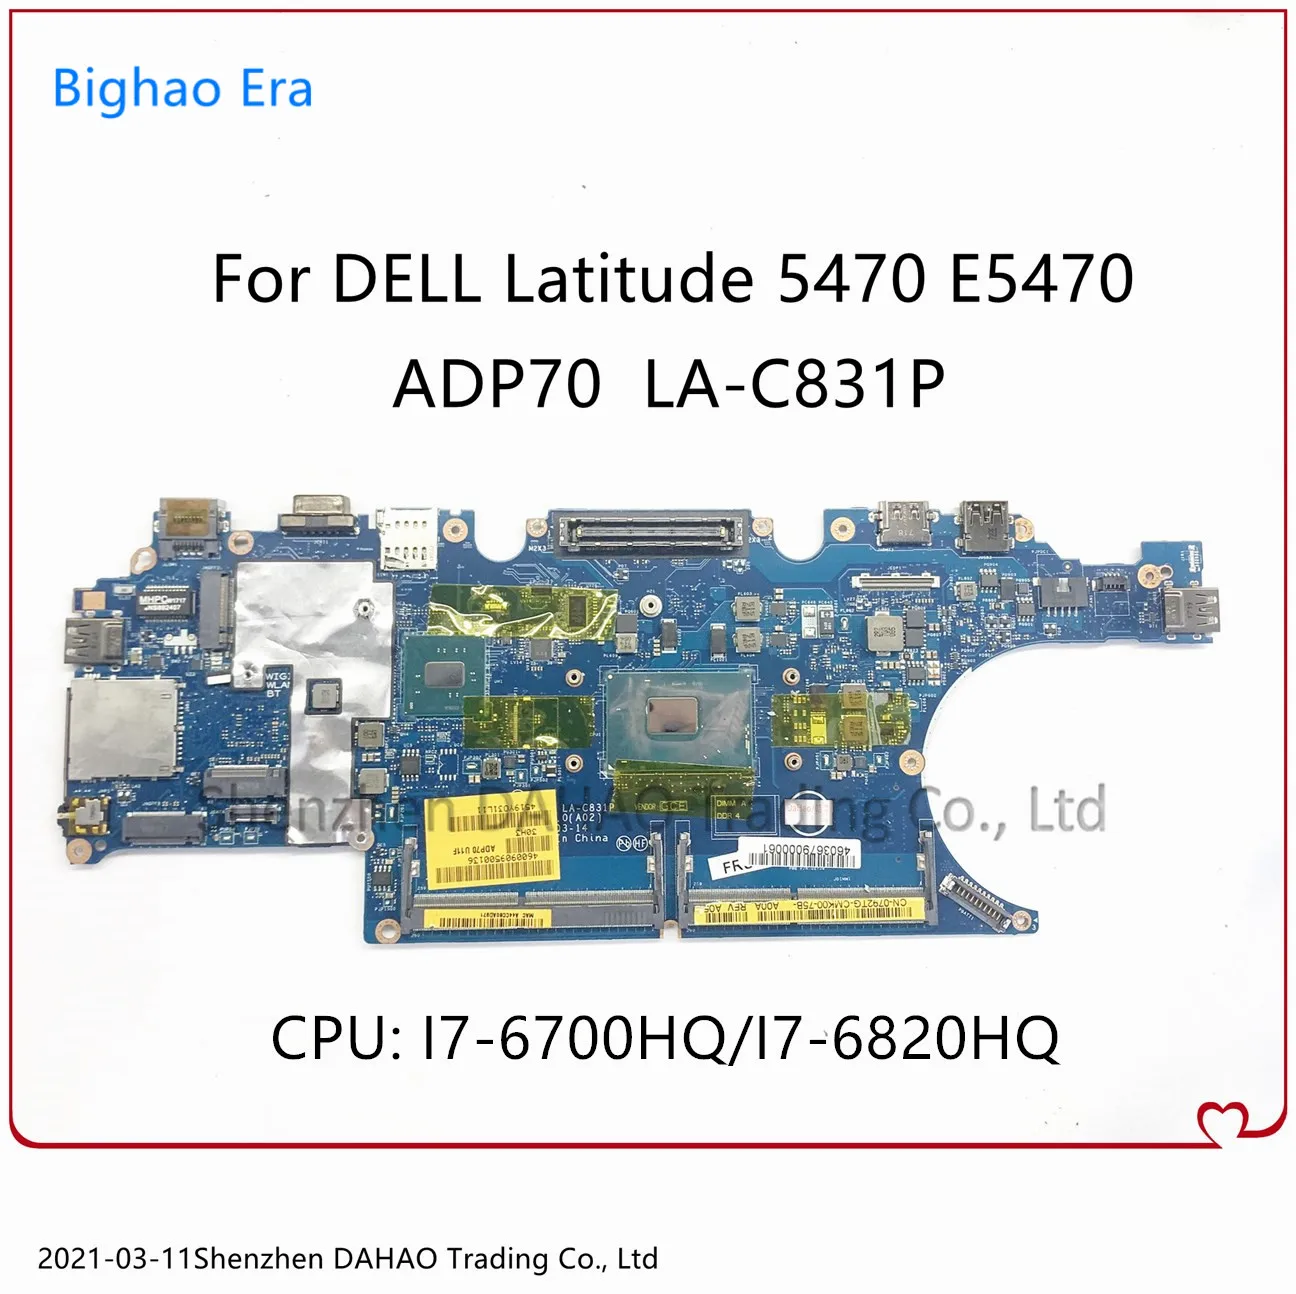 

ADP70 LA-C831P Mainboard For DELL Latitude 5470 E5470 Laptop Motherboard With i7-6820HQ CPU DDR4 CN 0476JC 100% Fully Tested